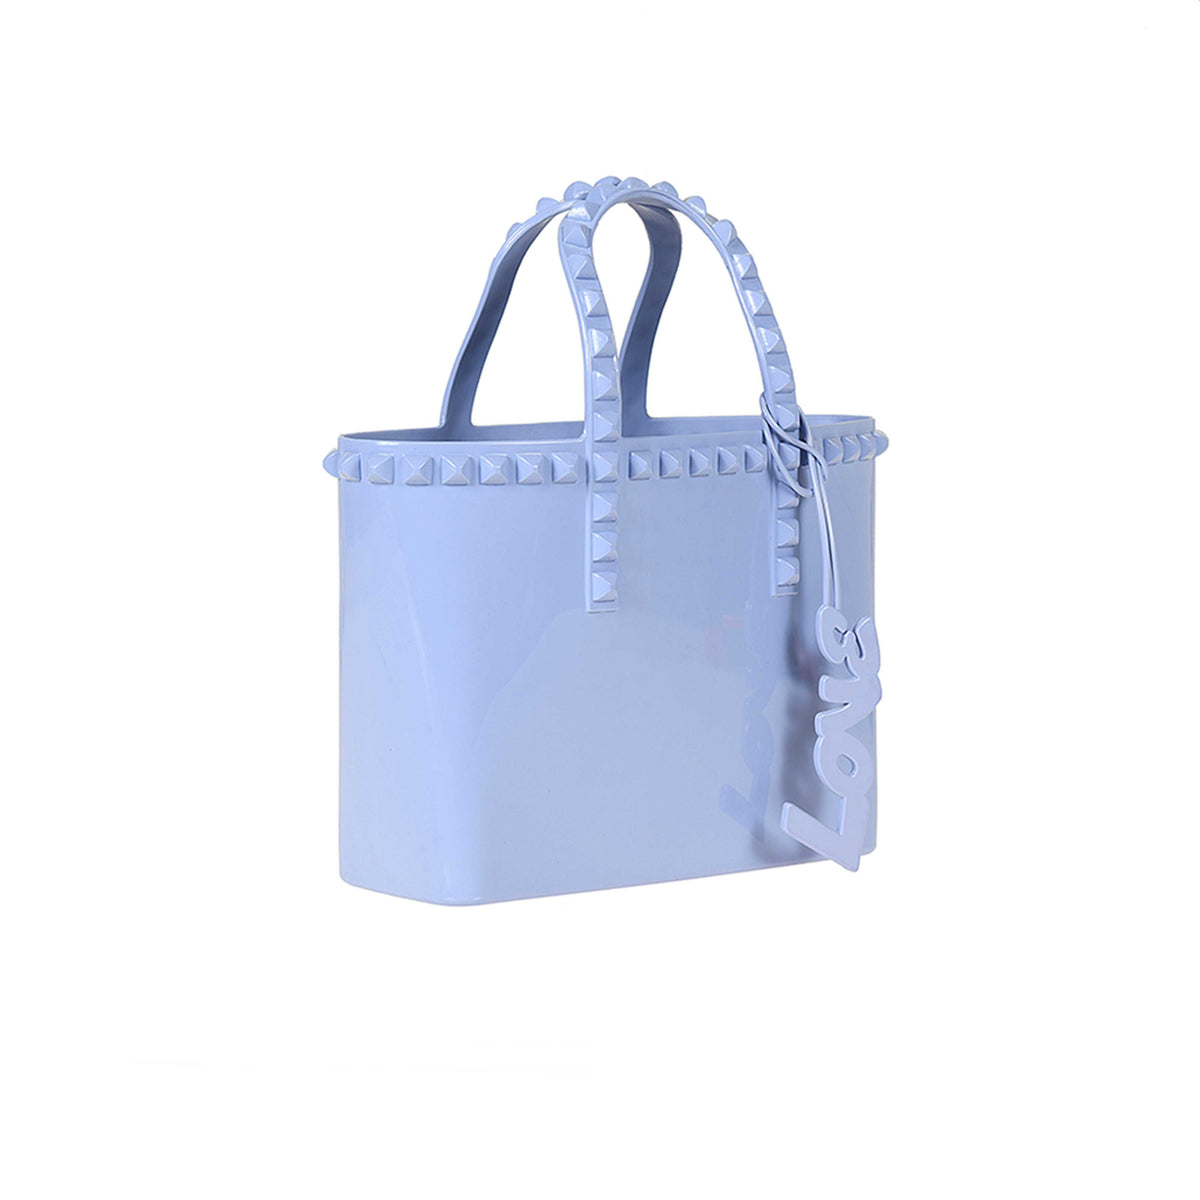 Micro mini beach bags for women in color baby blue